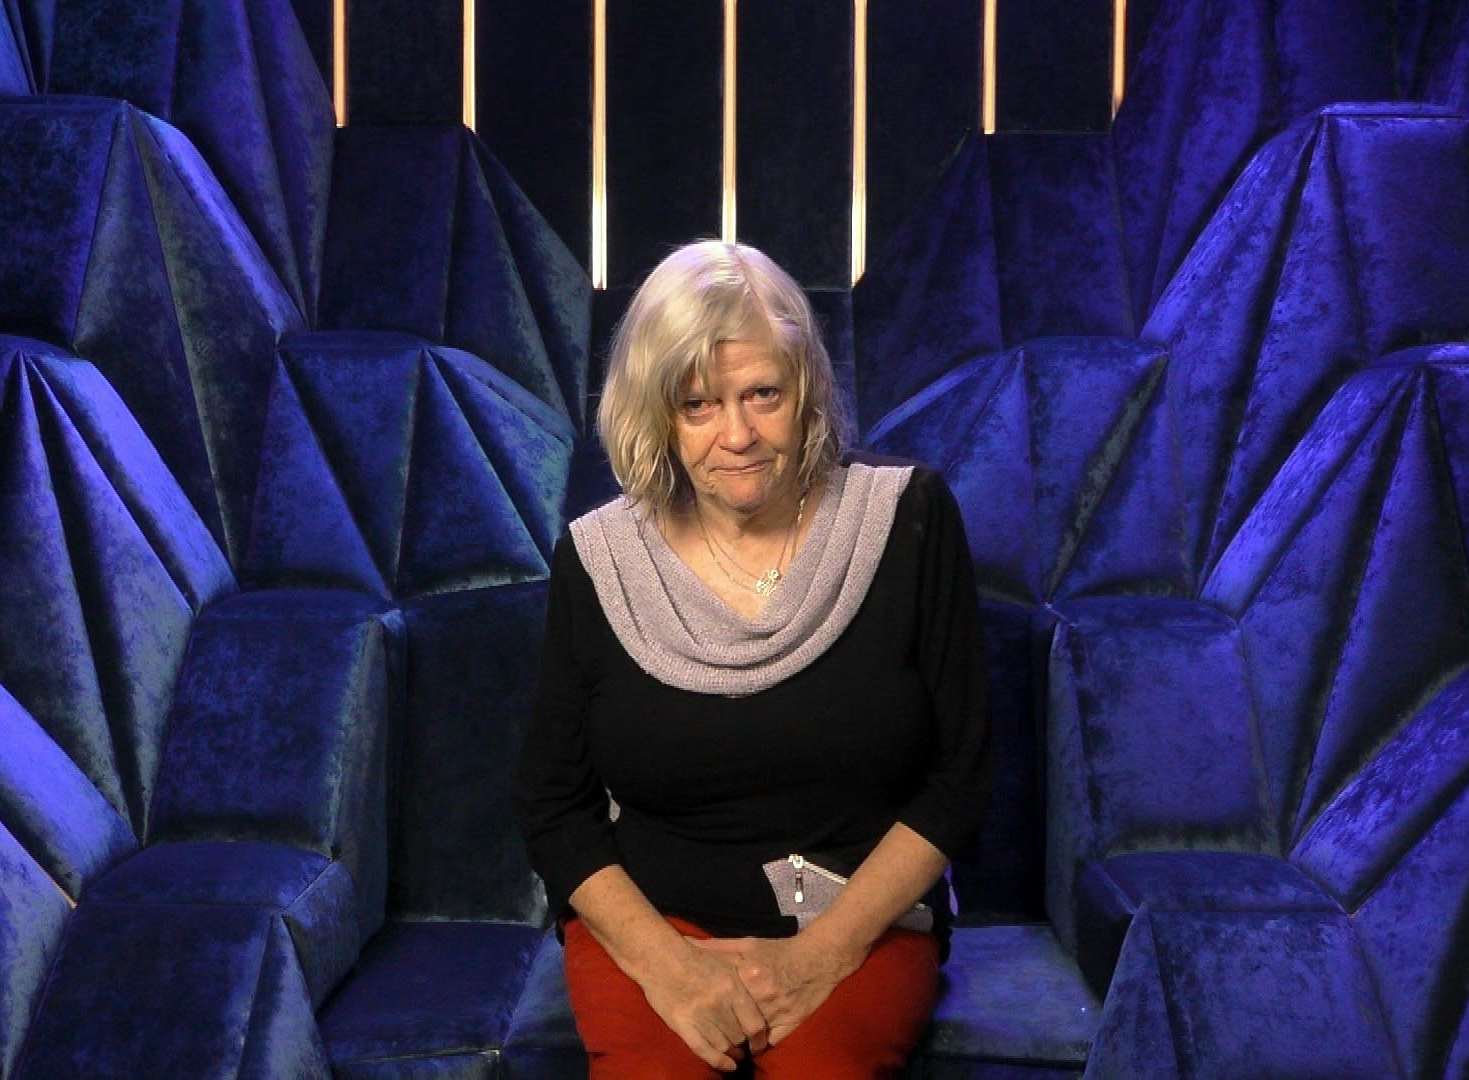 The diary room was, as ever, a place for housemates to air their opinions and grievances.